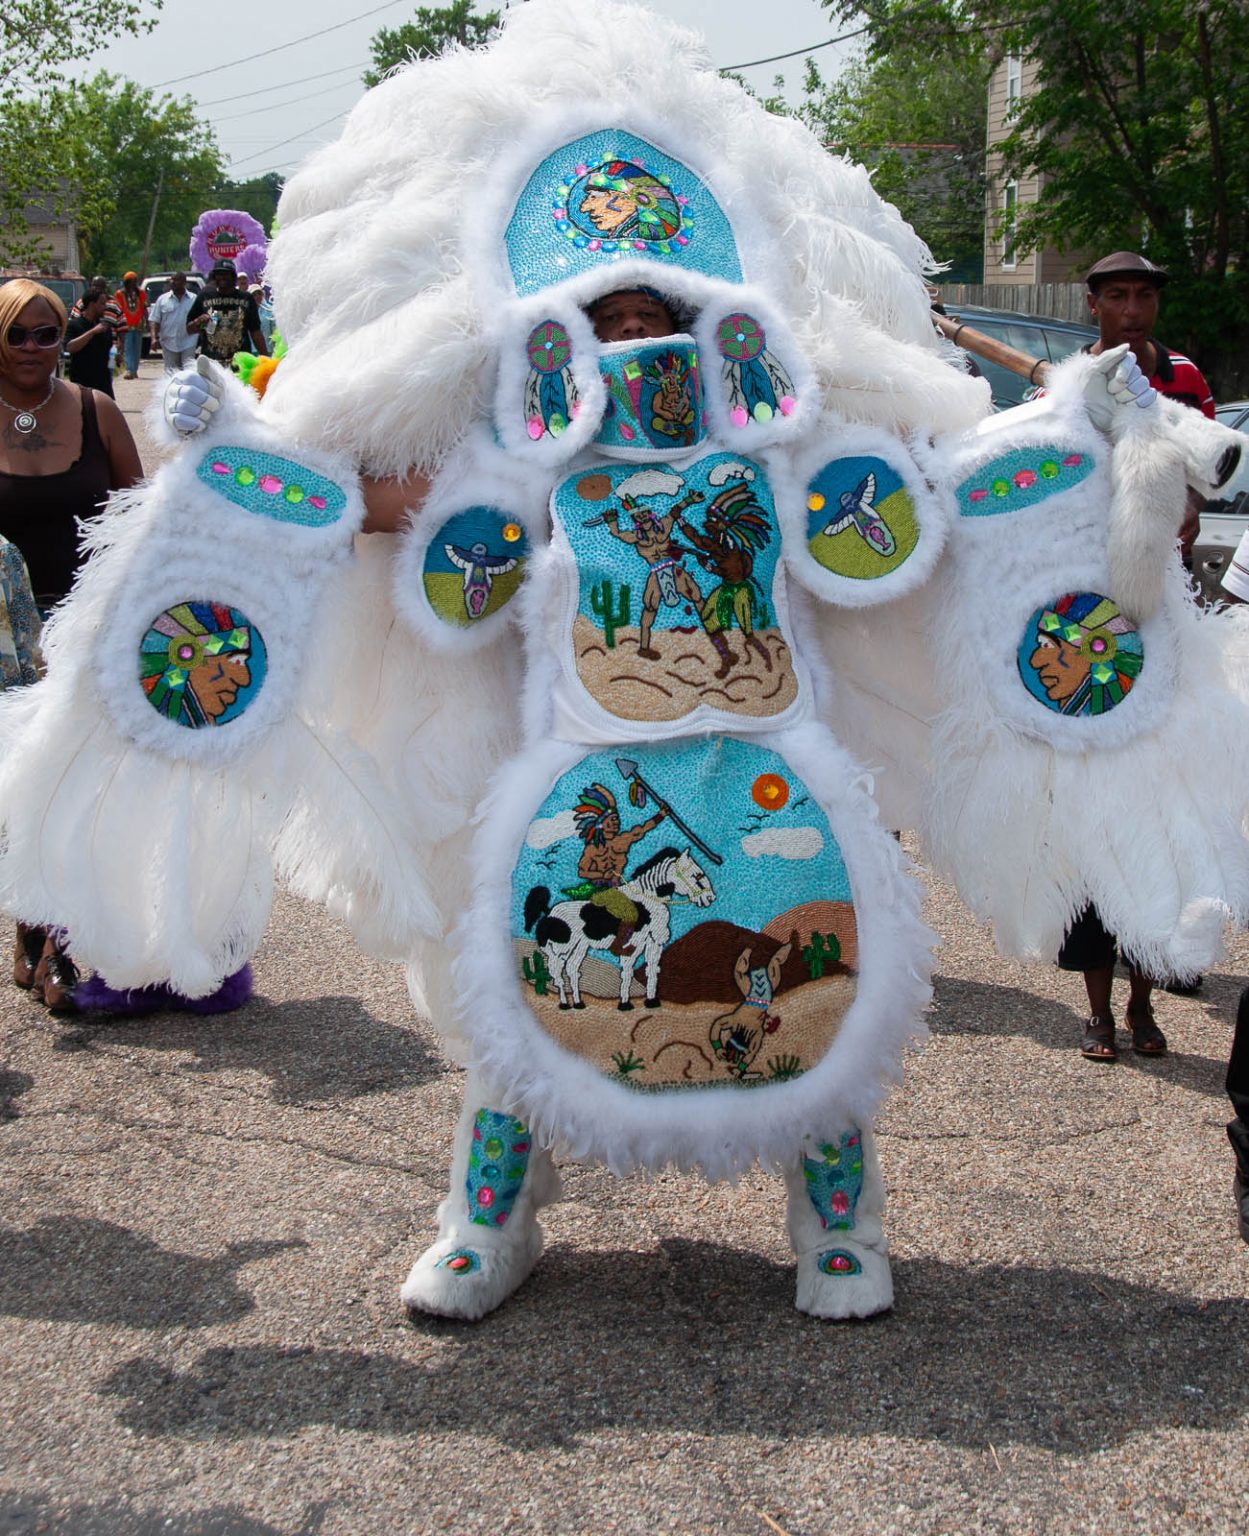 Central City, Mardi Gras Indians, New Orleans, Super Sunday